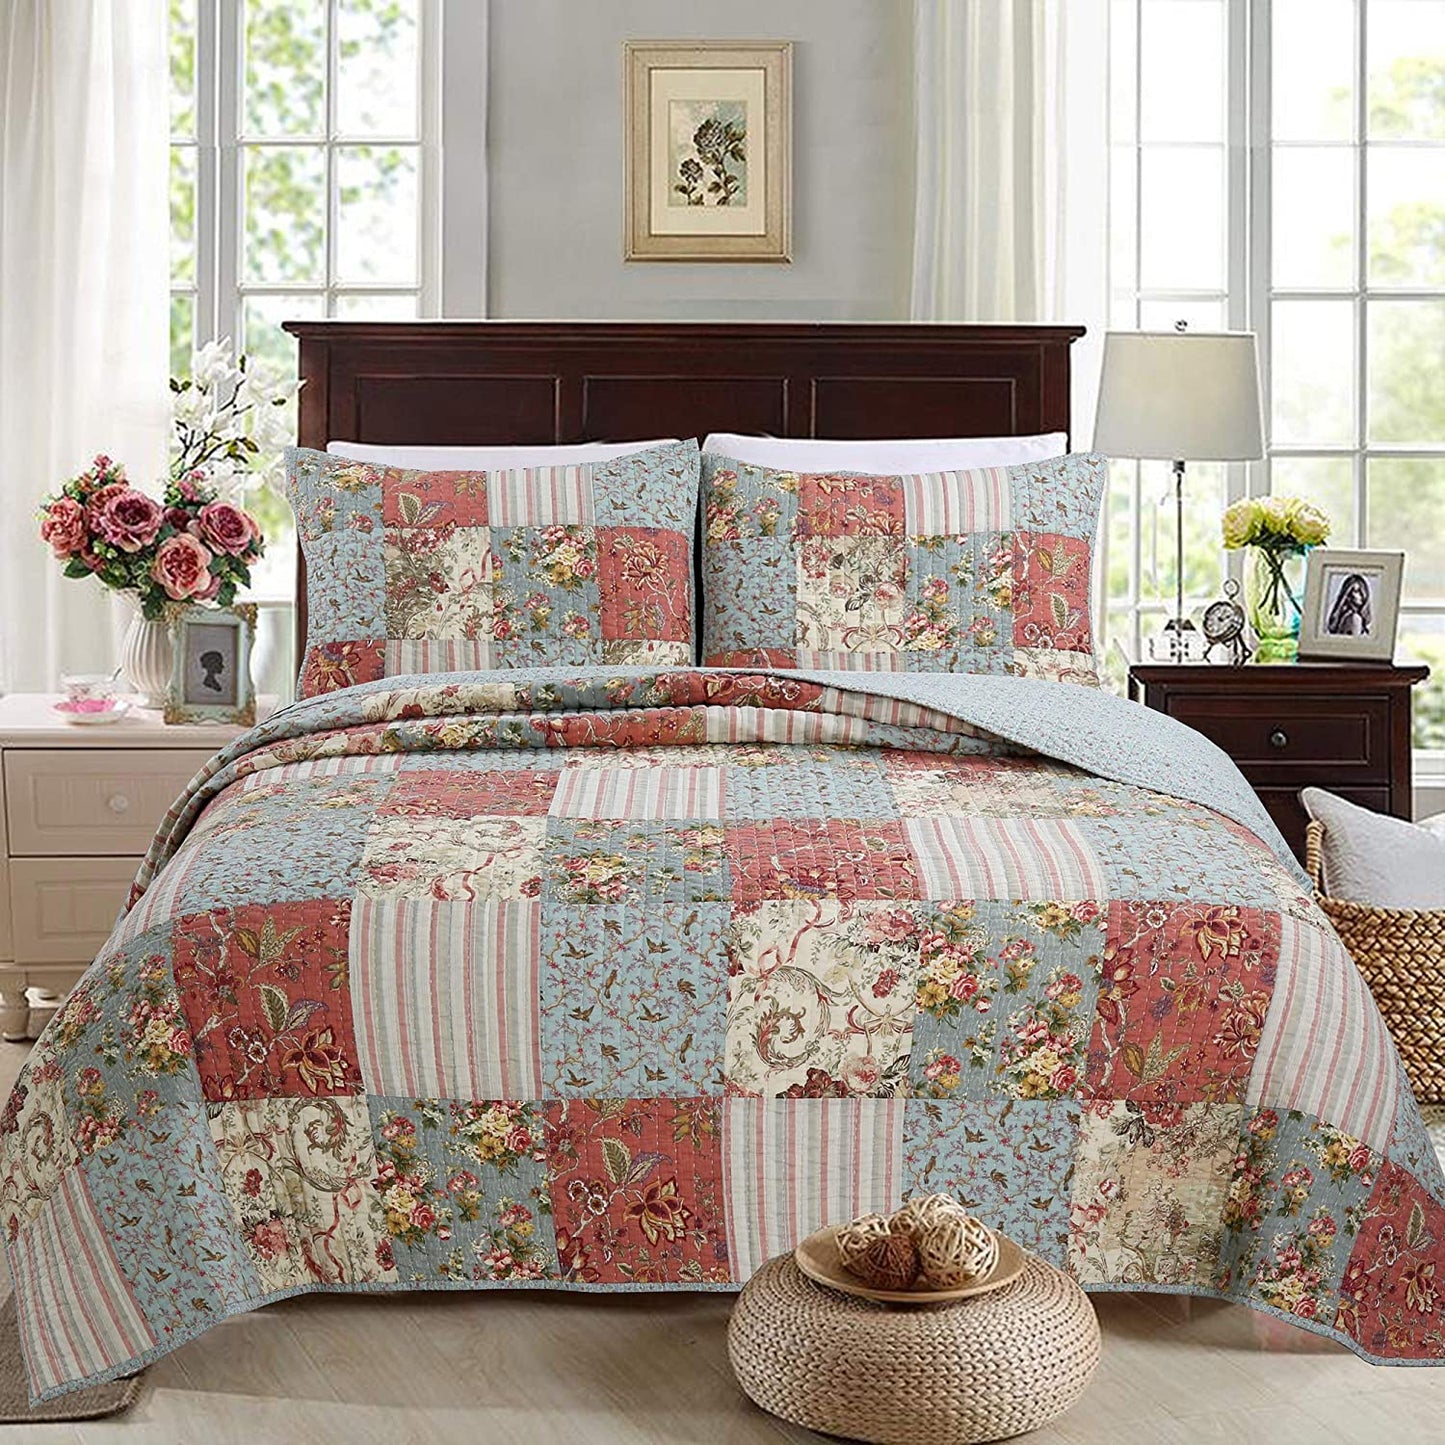 Light Tone Bohemian 3 Pieces Quilt Set with 2 Pillowcases